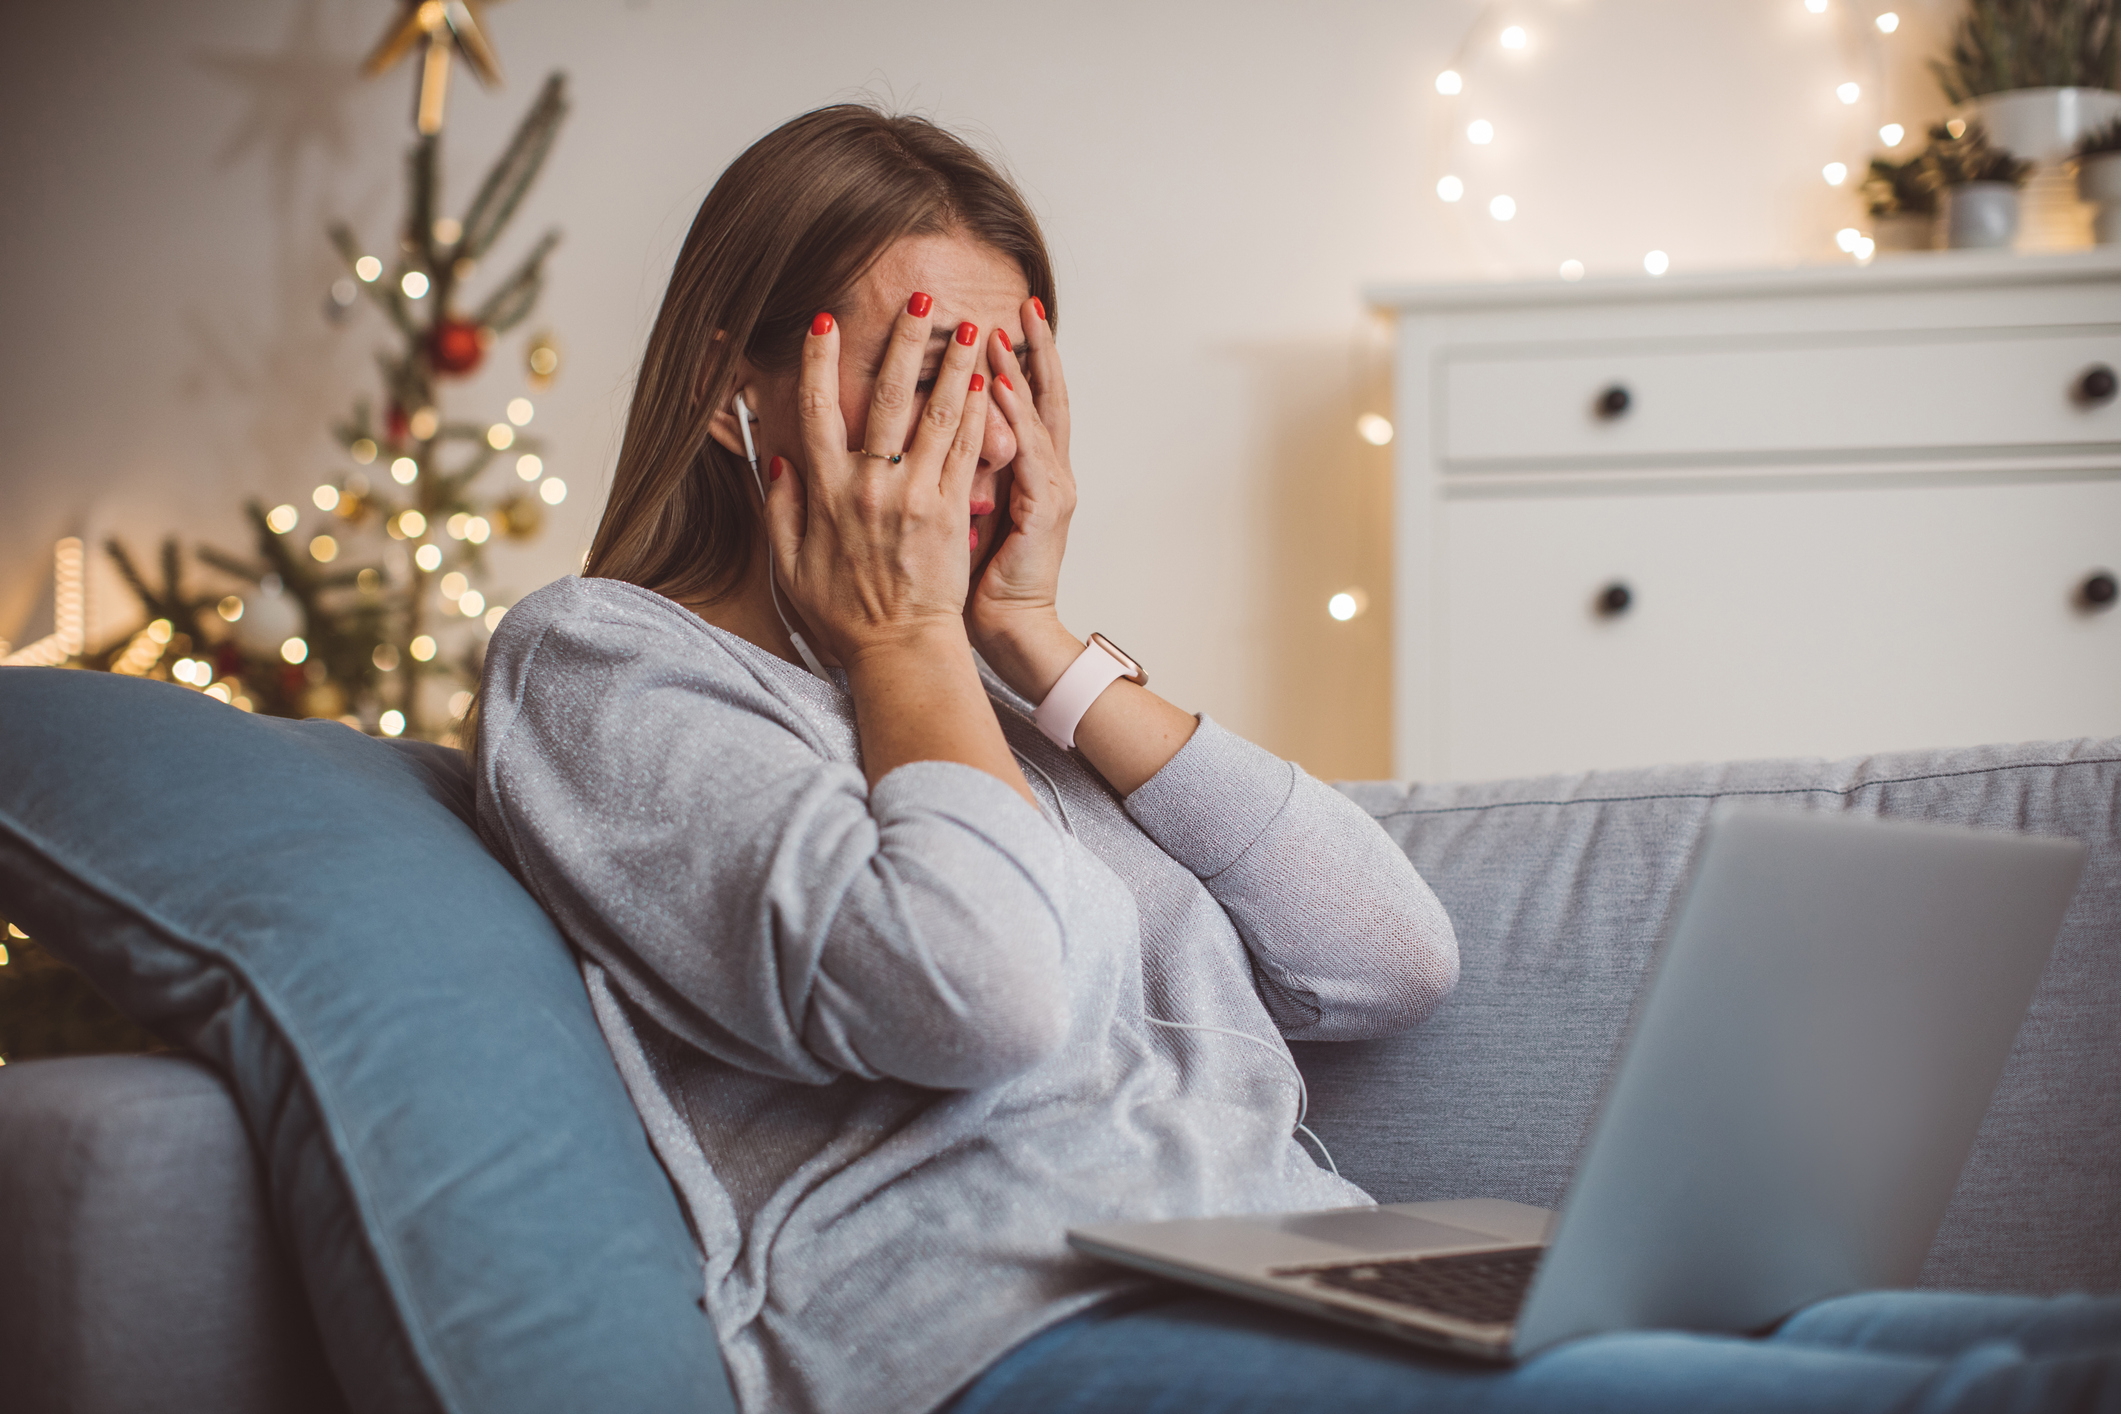 A sad woman sitting on a couch on a laptop with a Christmas tree in the background.